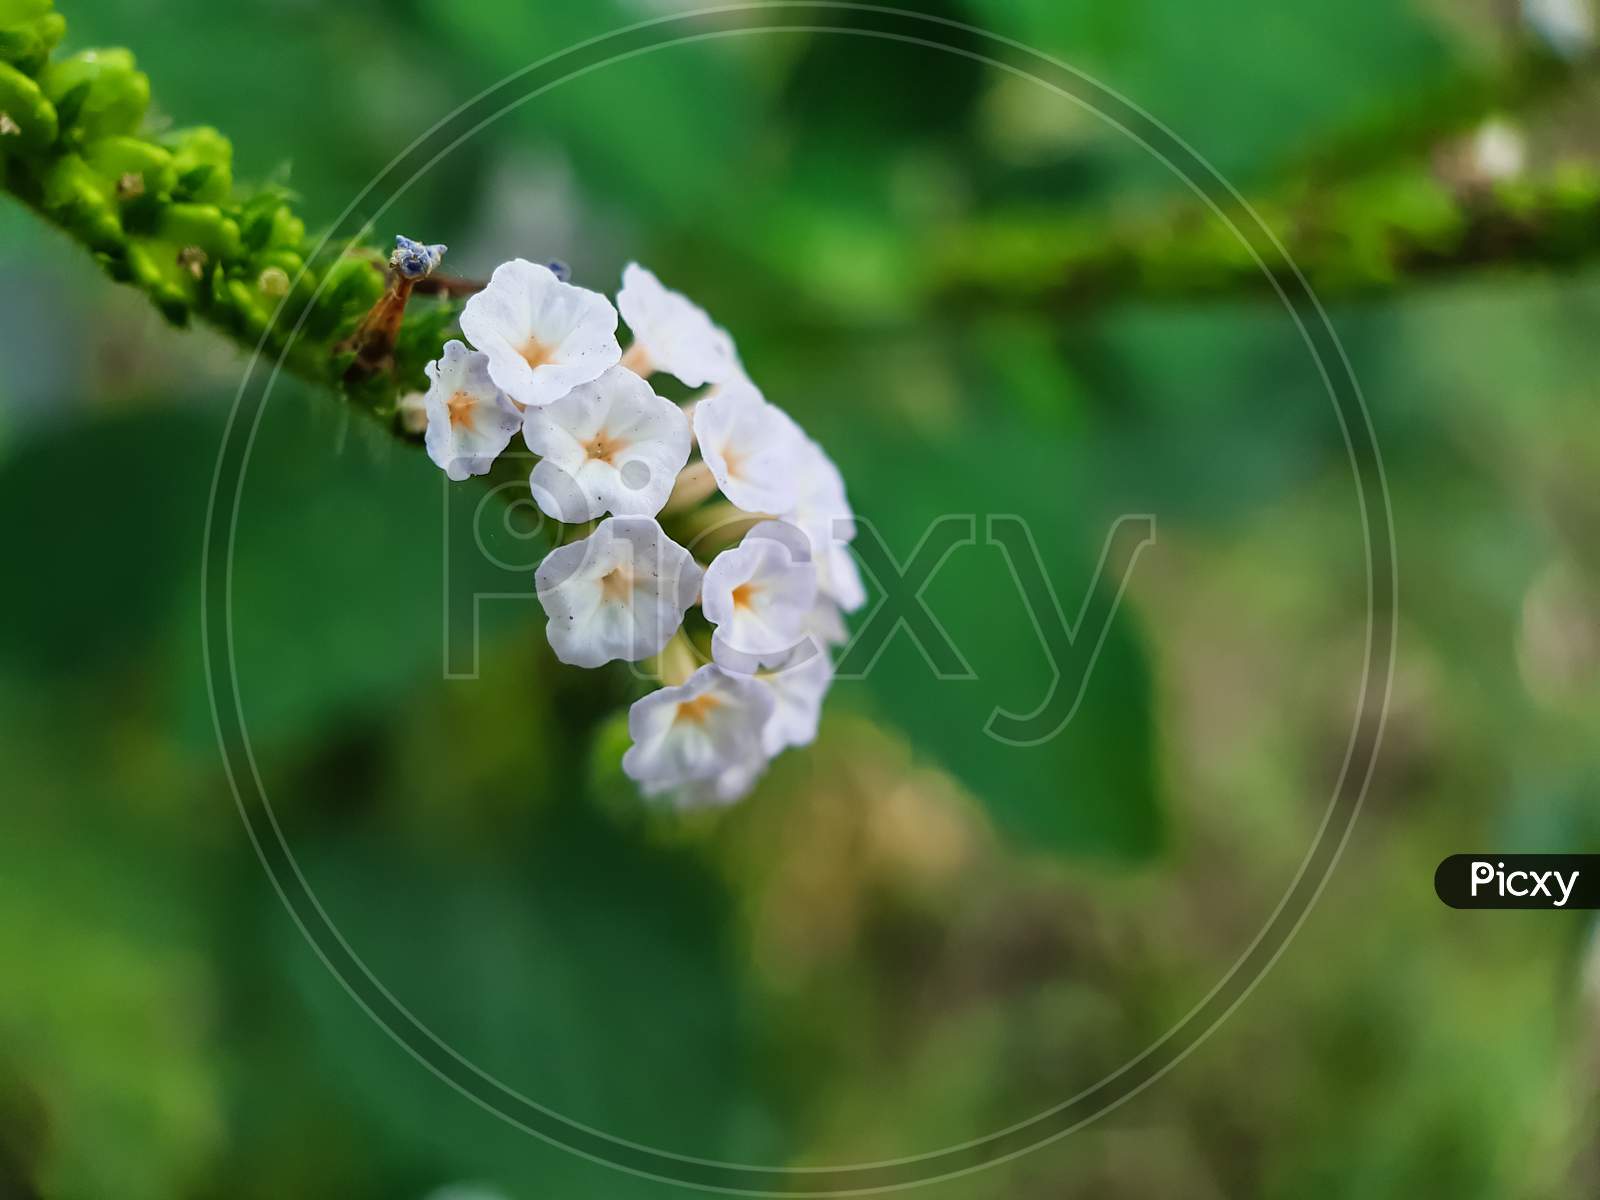 White Color Grass Flower On The Green Tree And Green Background In The Garden.